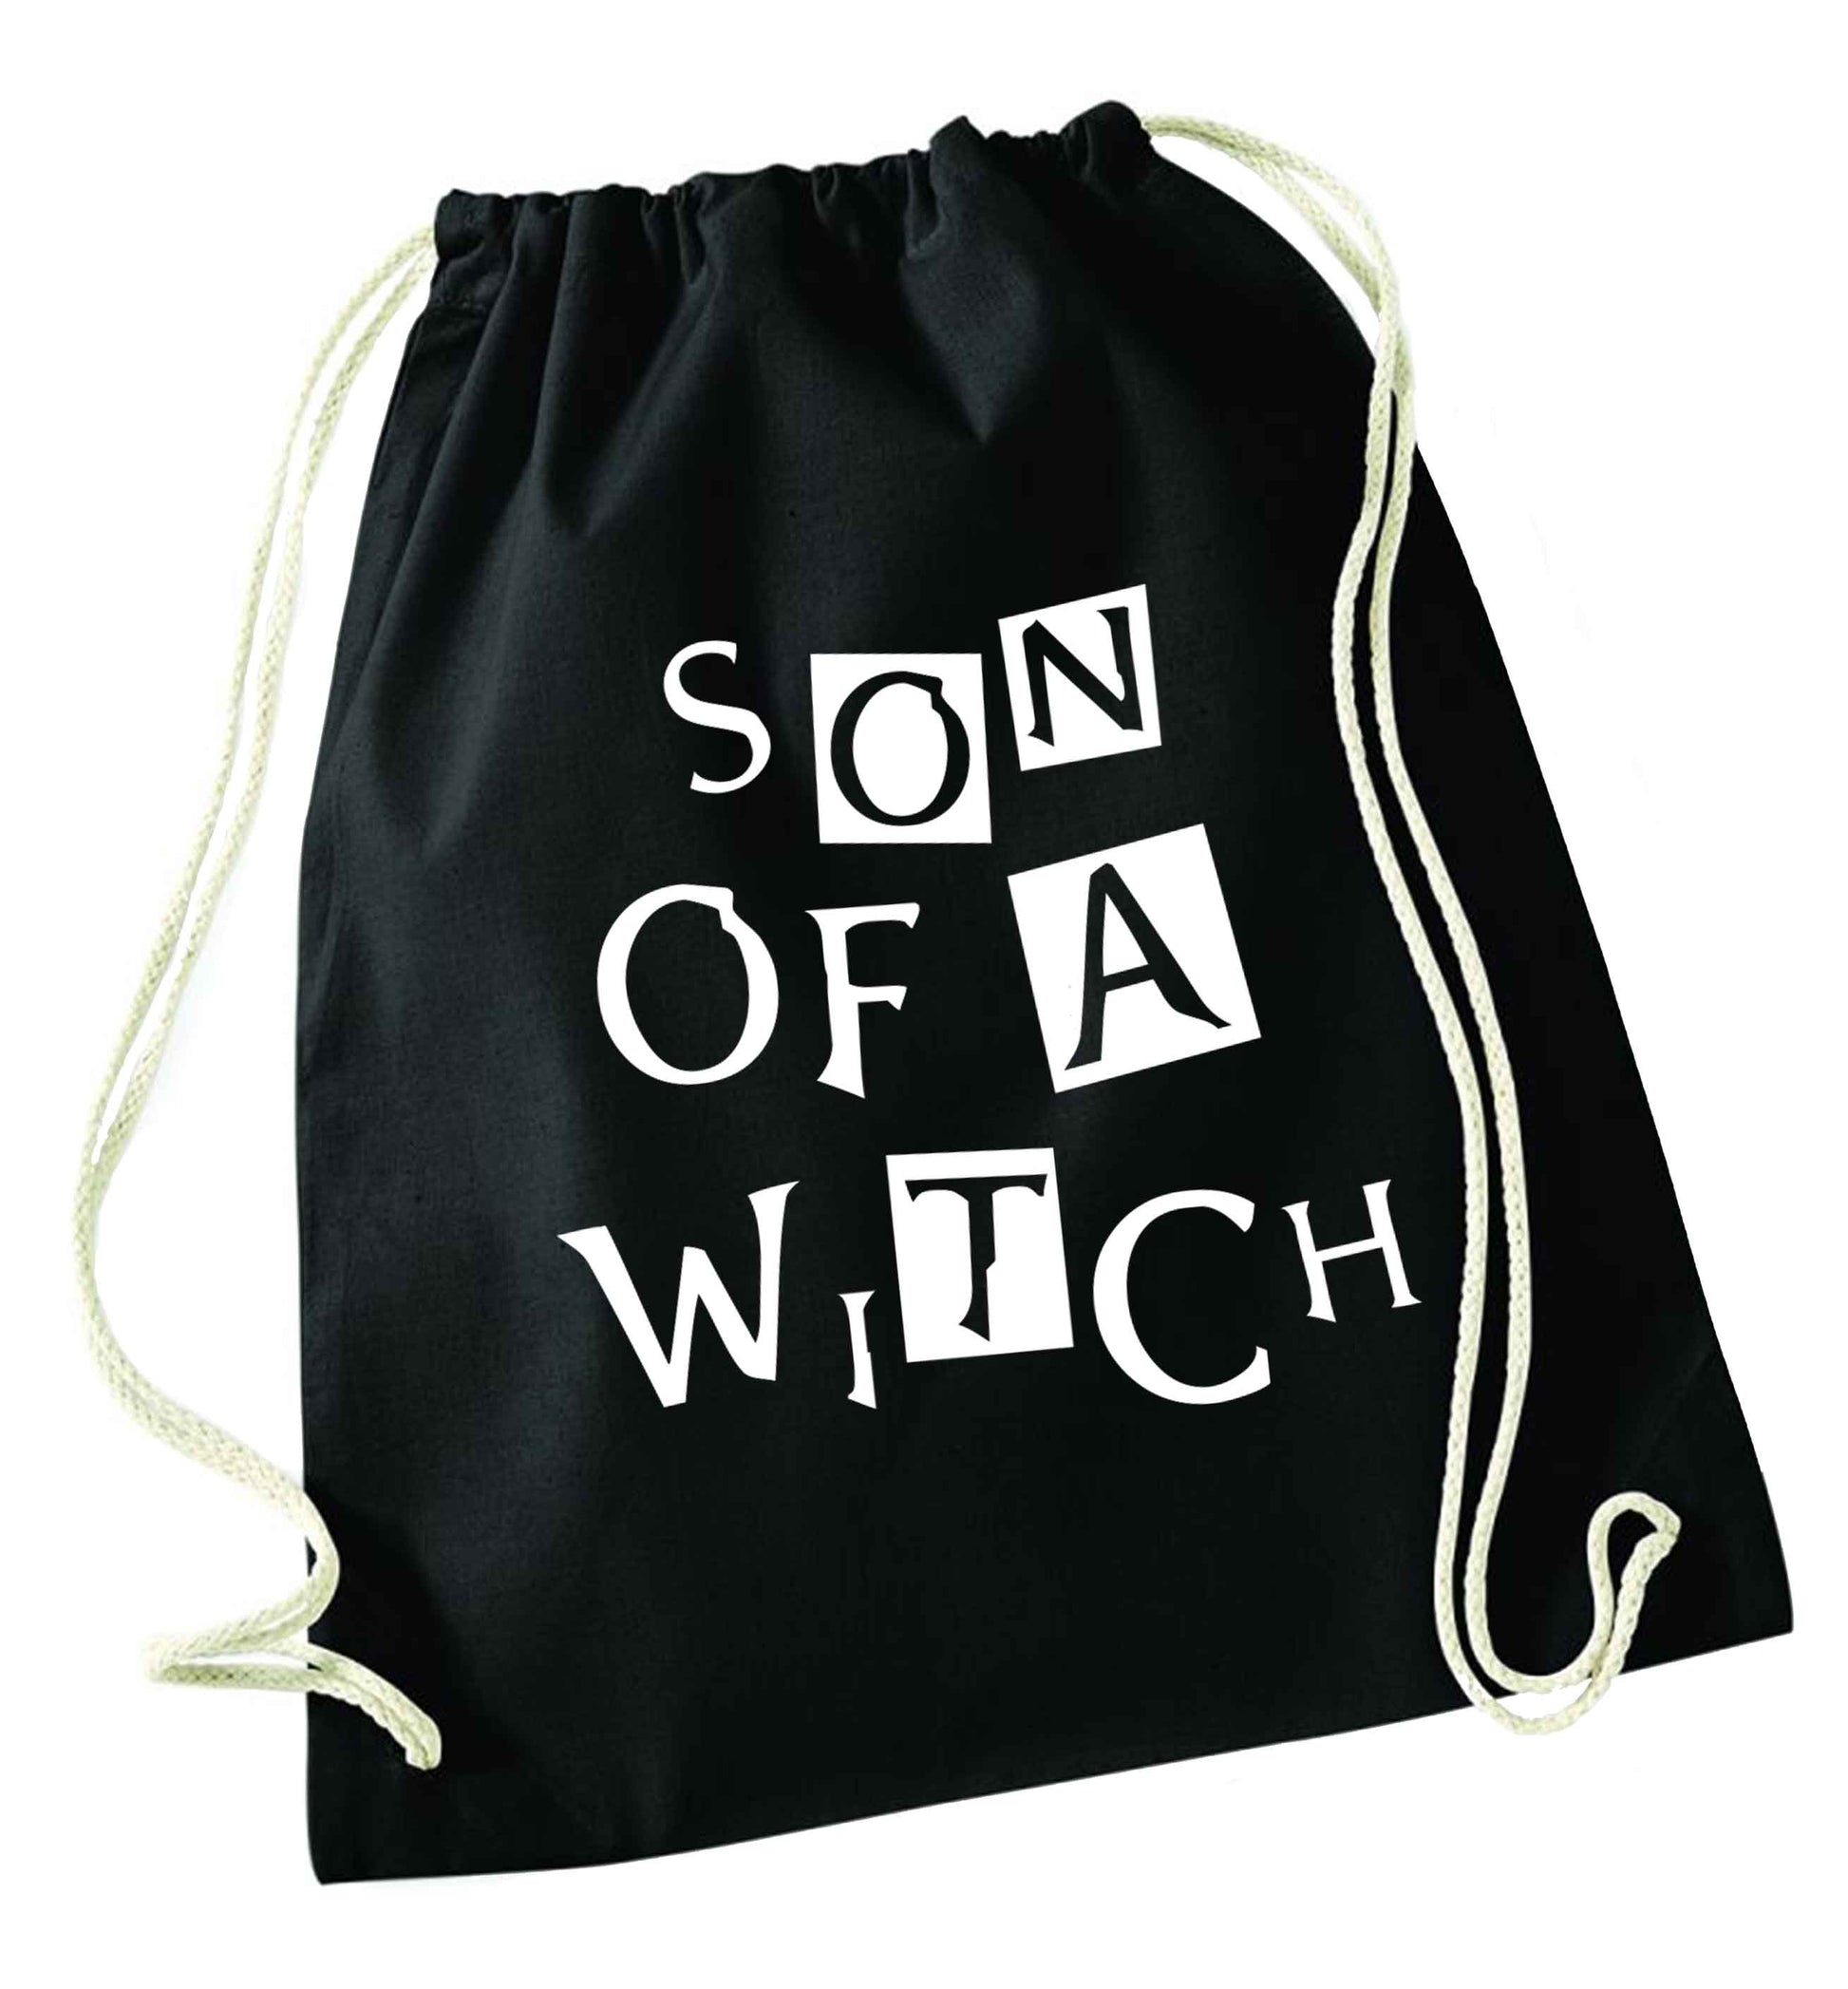 Son of a witch black drawstring bag